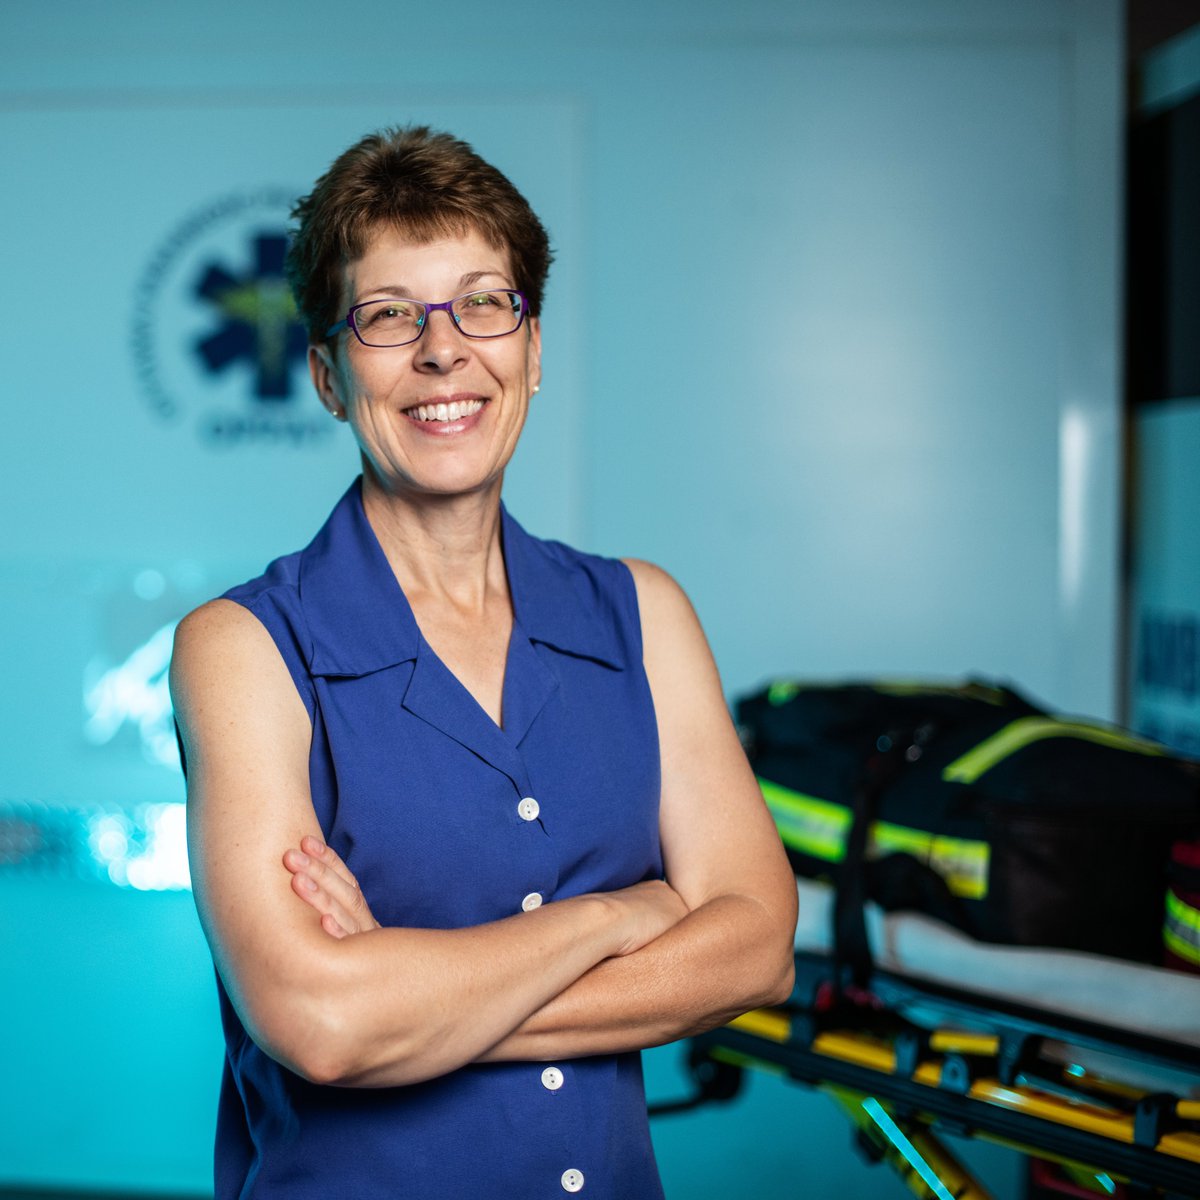 A rising number of #paramedics are sustaining injuries from threats and acts of violence while on duty. Laurier researcher Renée MacPhee is partnering with @ParamedicChiefs for a national study on violence against paramedics. Learn more: paramedicchiefs.ca/violence-again…